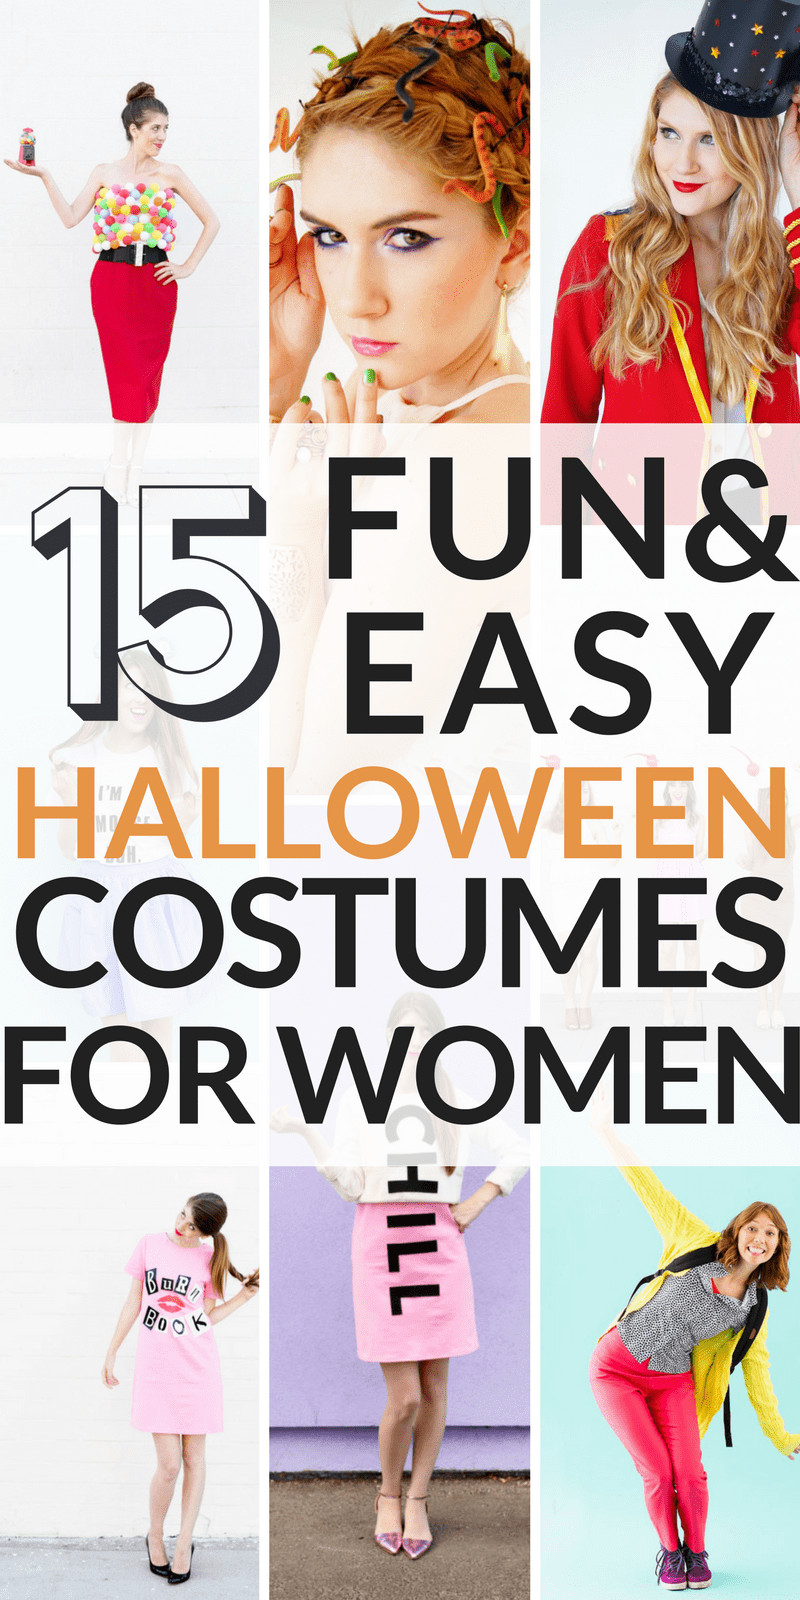 Women DIY Costume Ideas
 15 Cheap and Easy DIY Halloween Costumes for Women